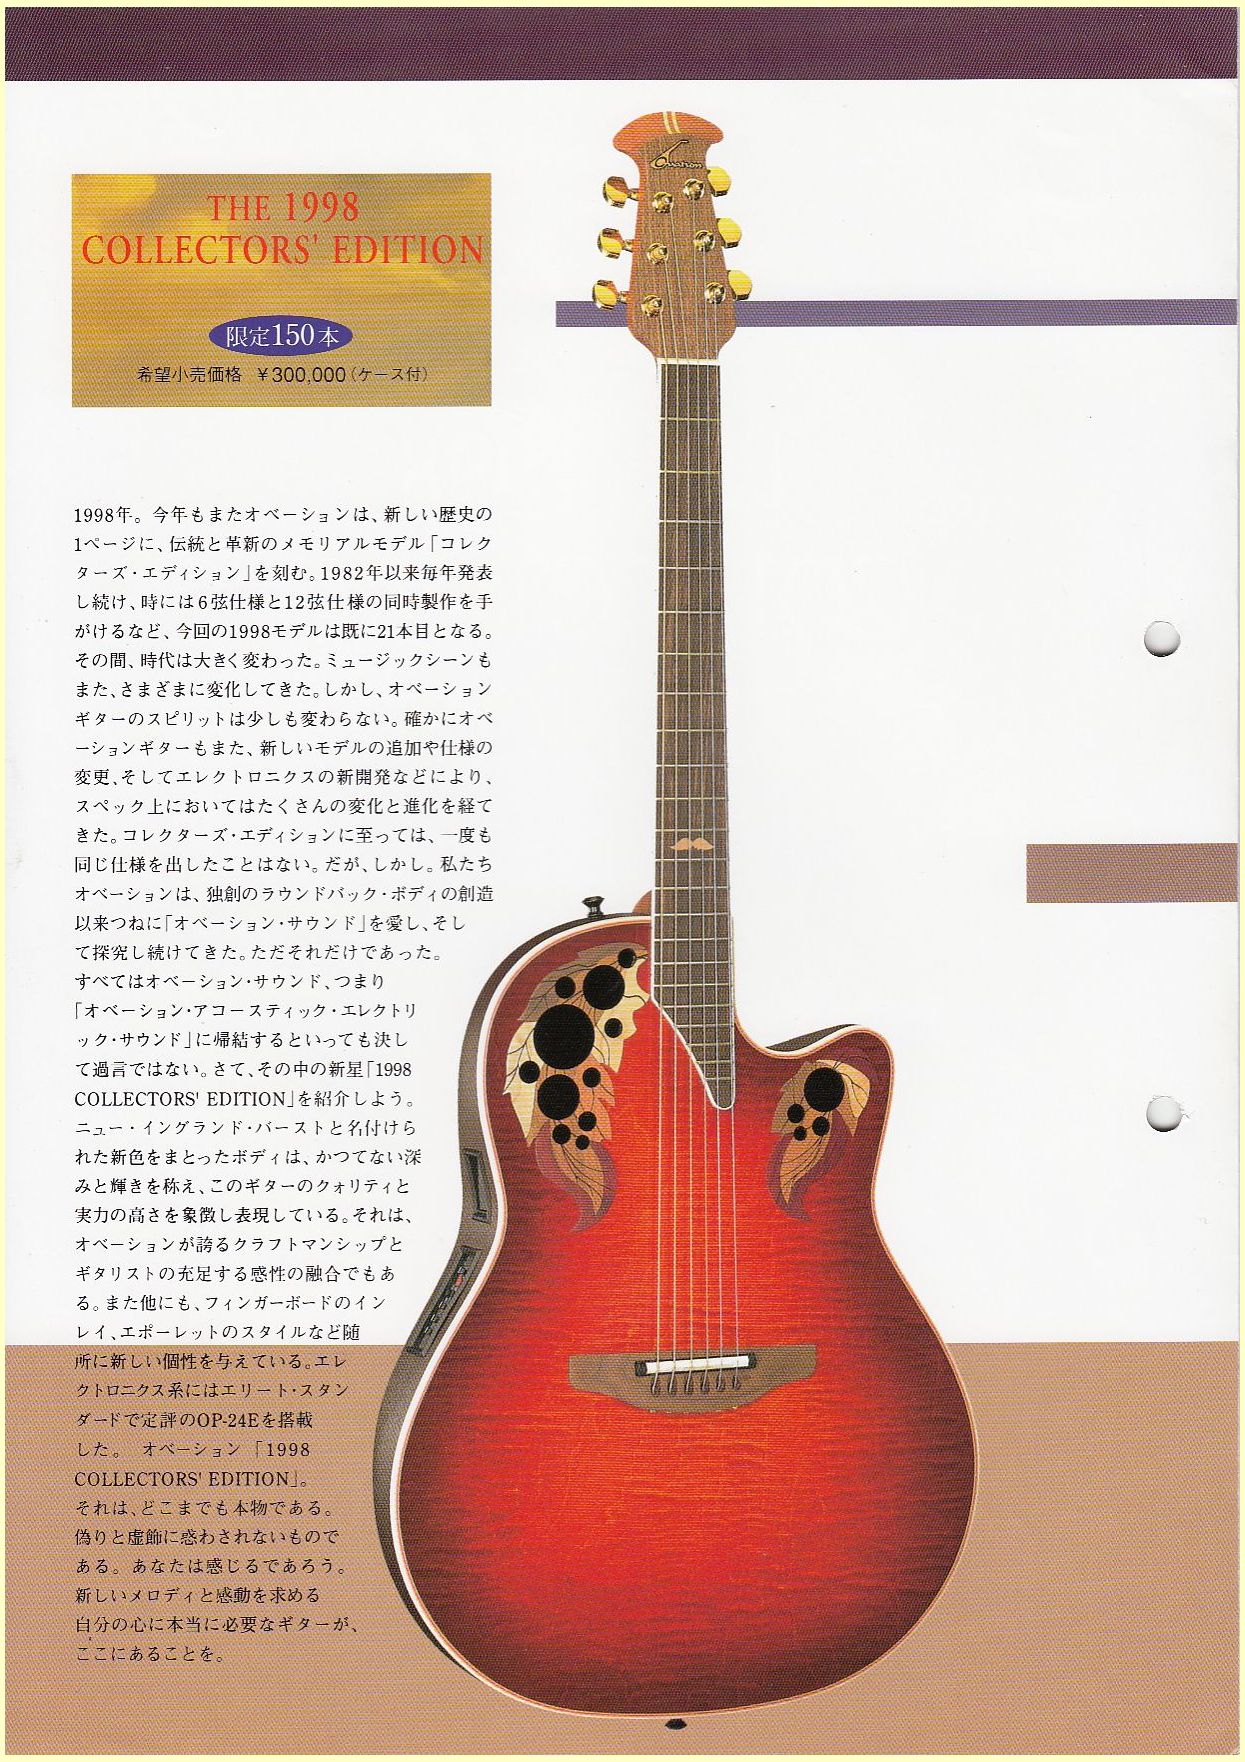 Ovation 1998 Collector's Edition Japanese Brochure